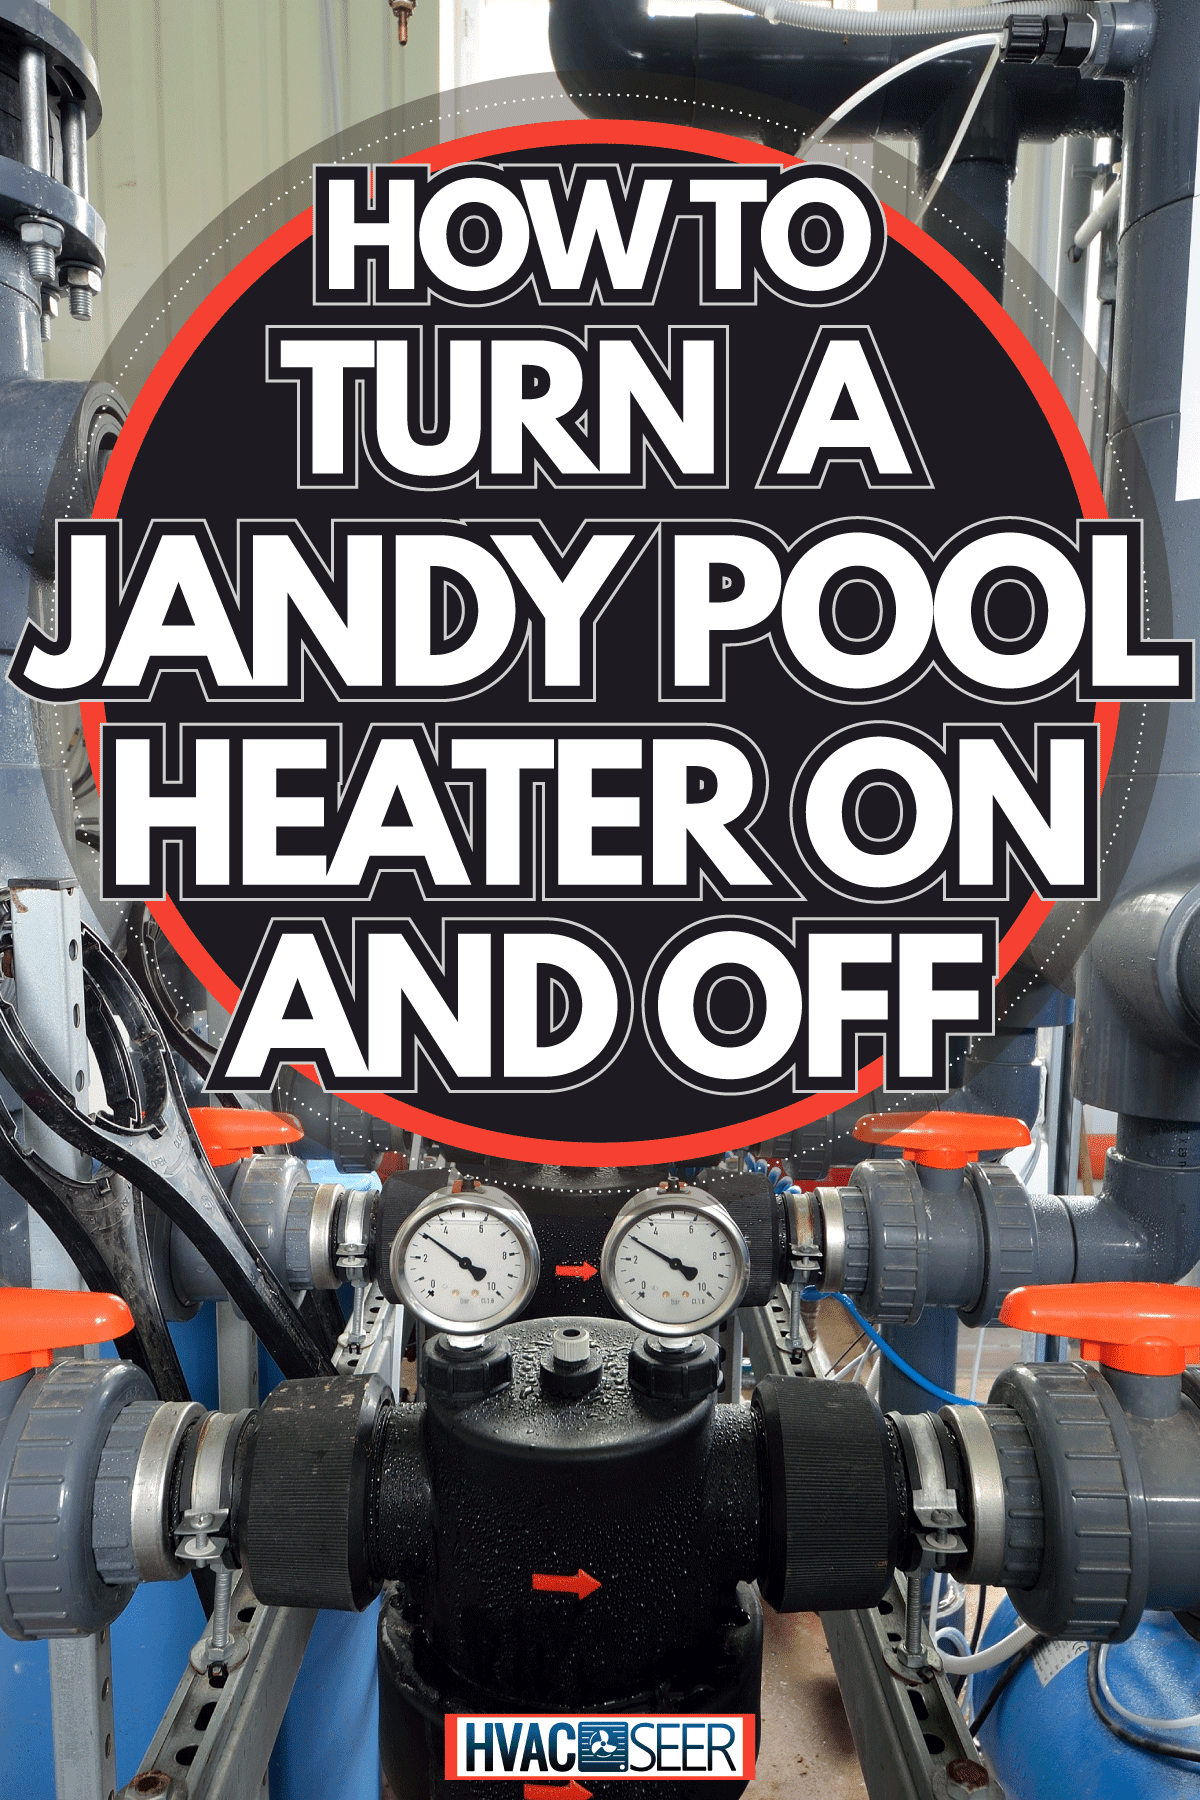 Water pipes boiler room for pool, How To Turn A Jandy Pool Heater On And Off